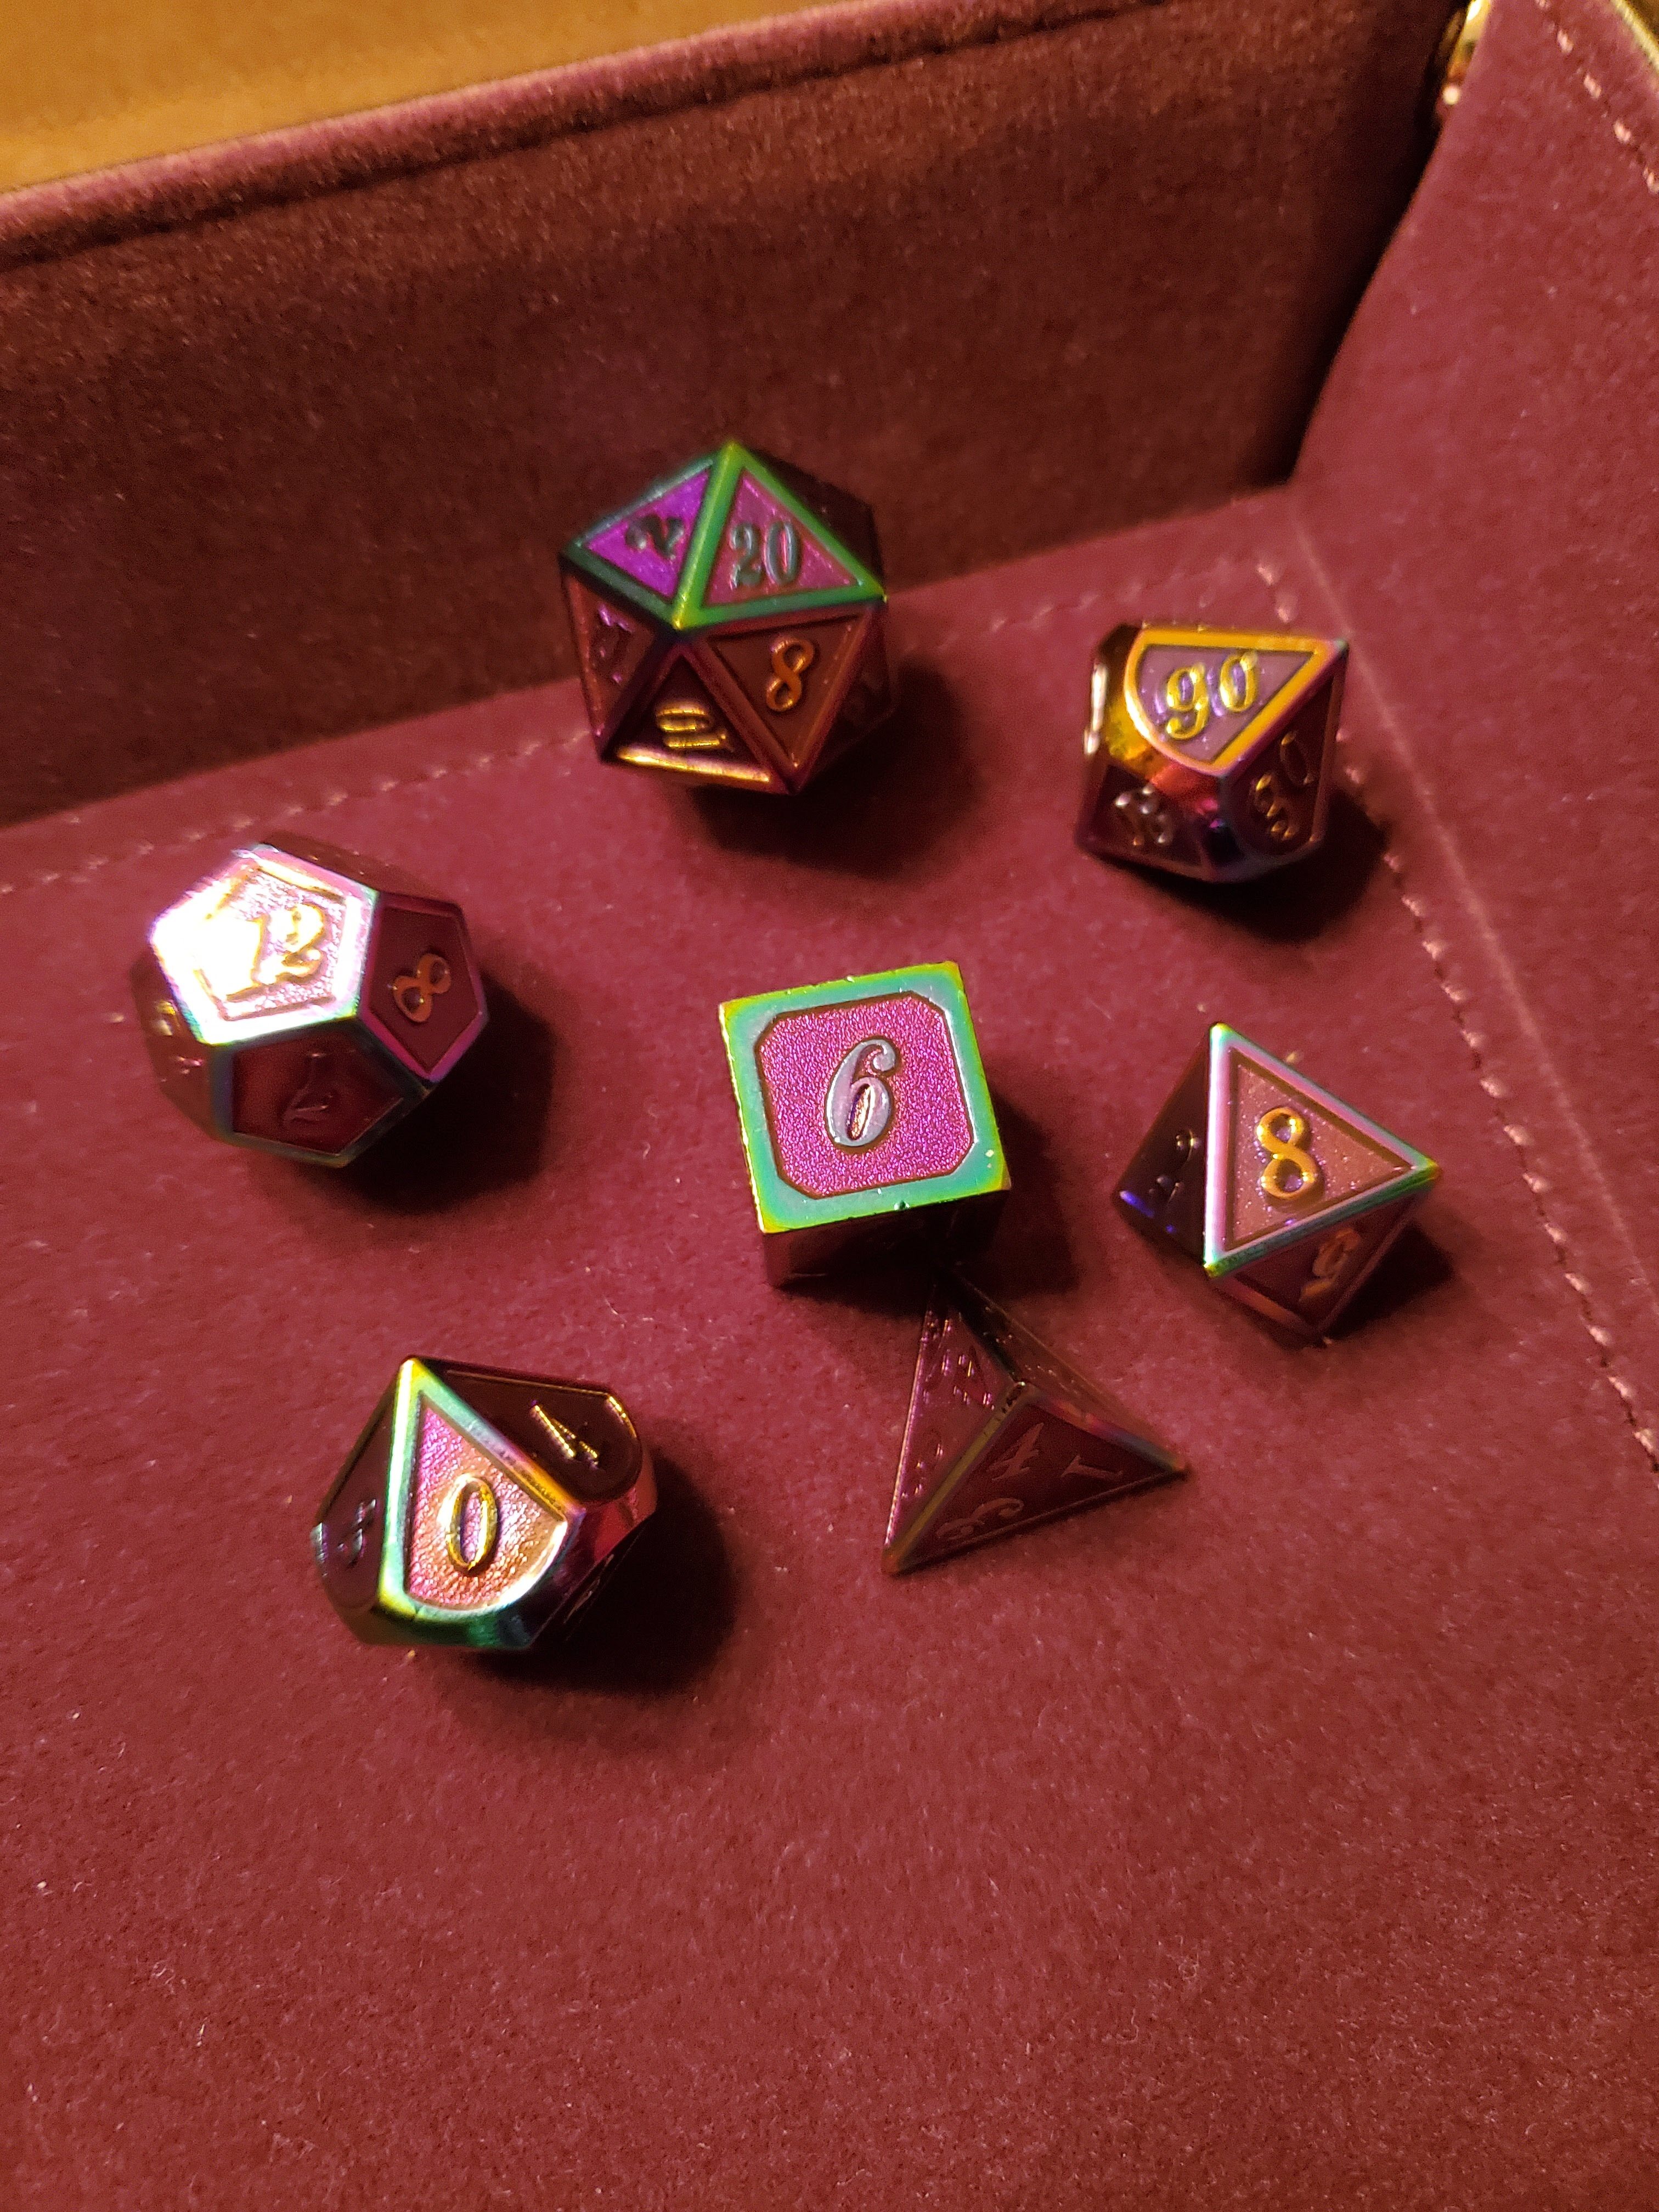 Metal dice in a tray